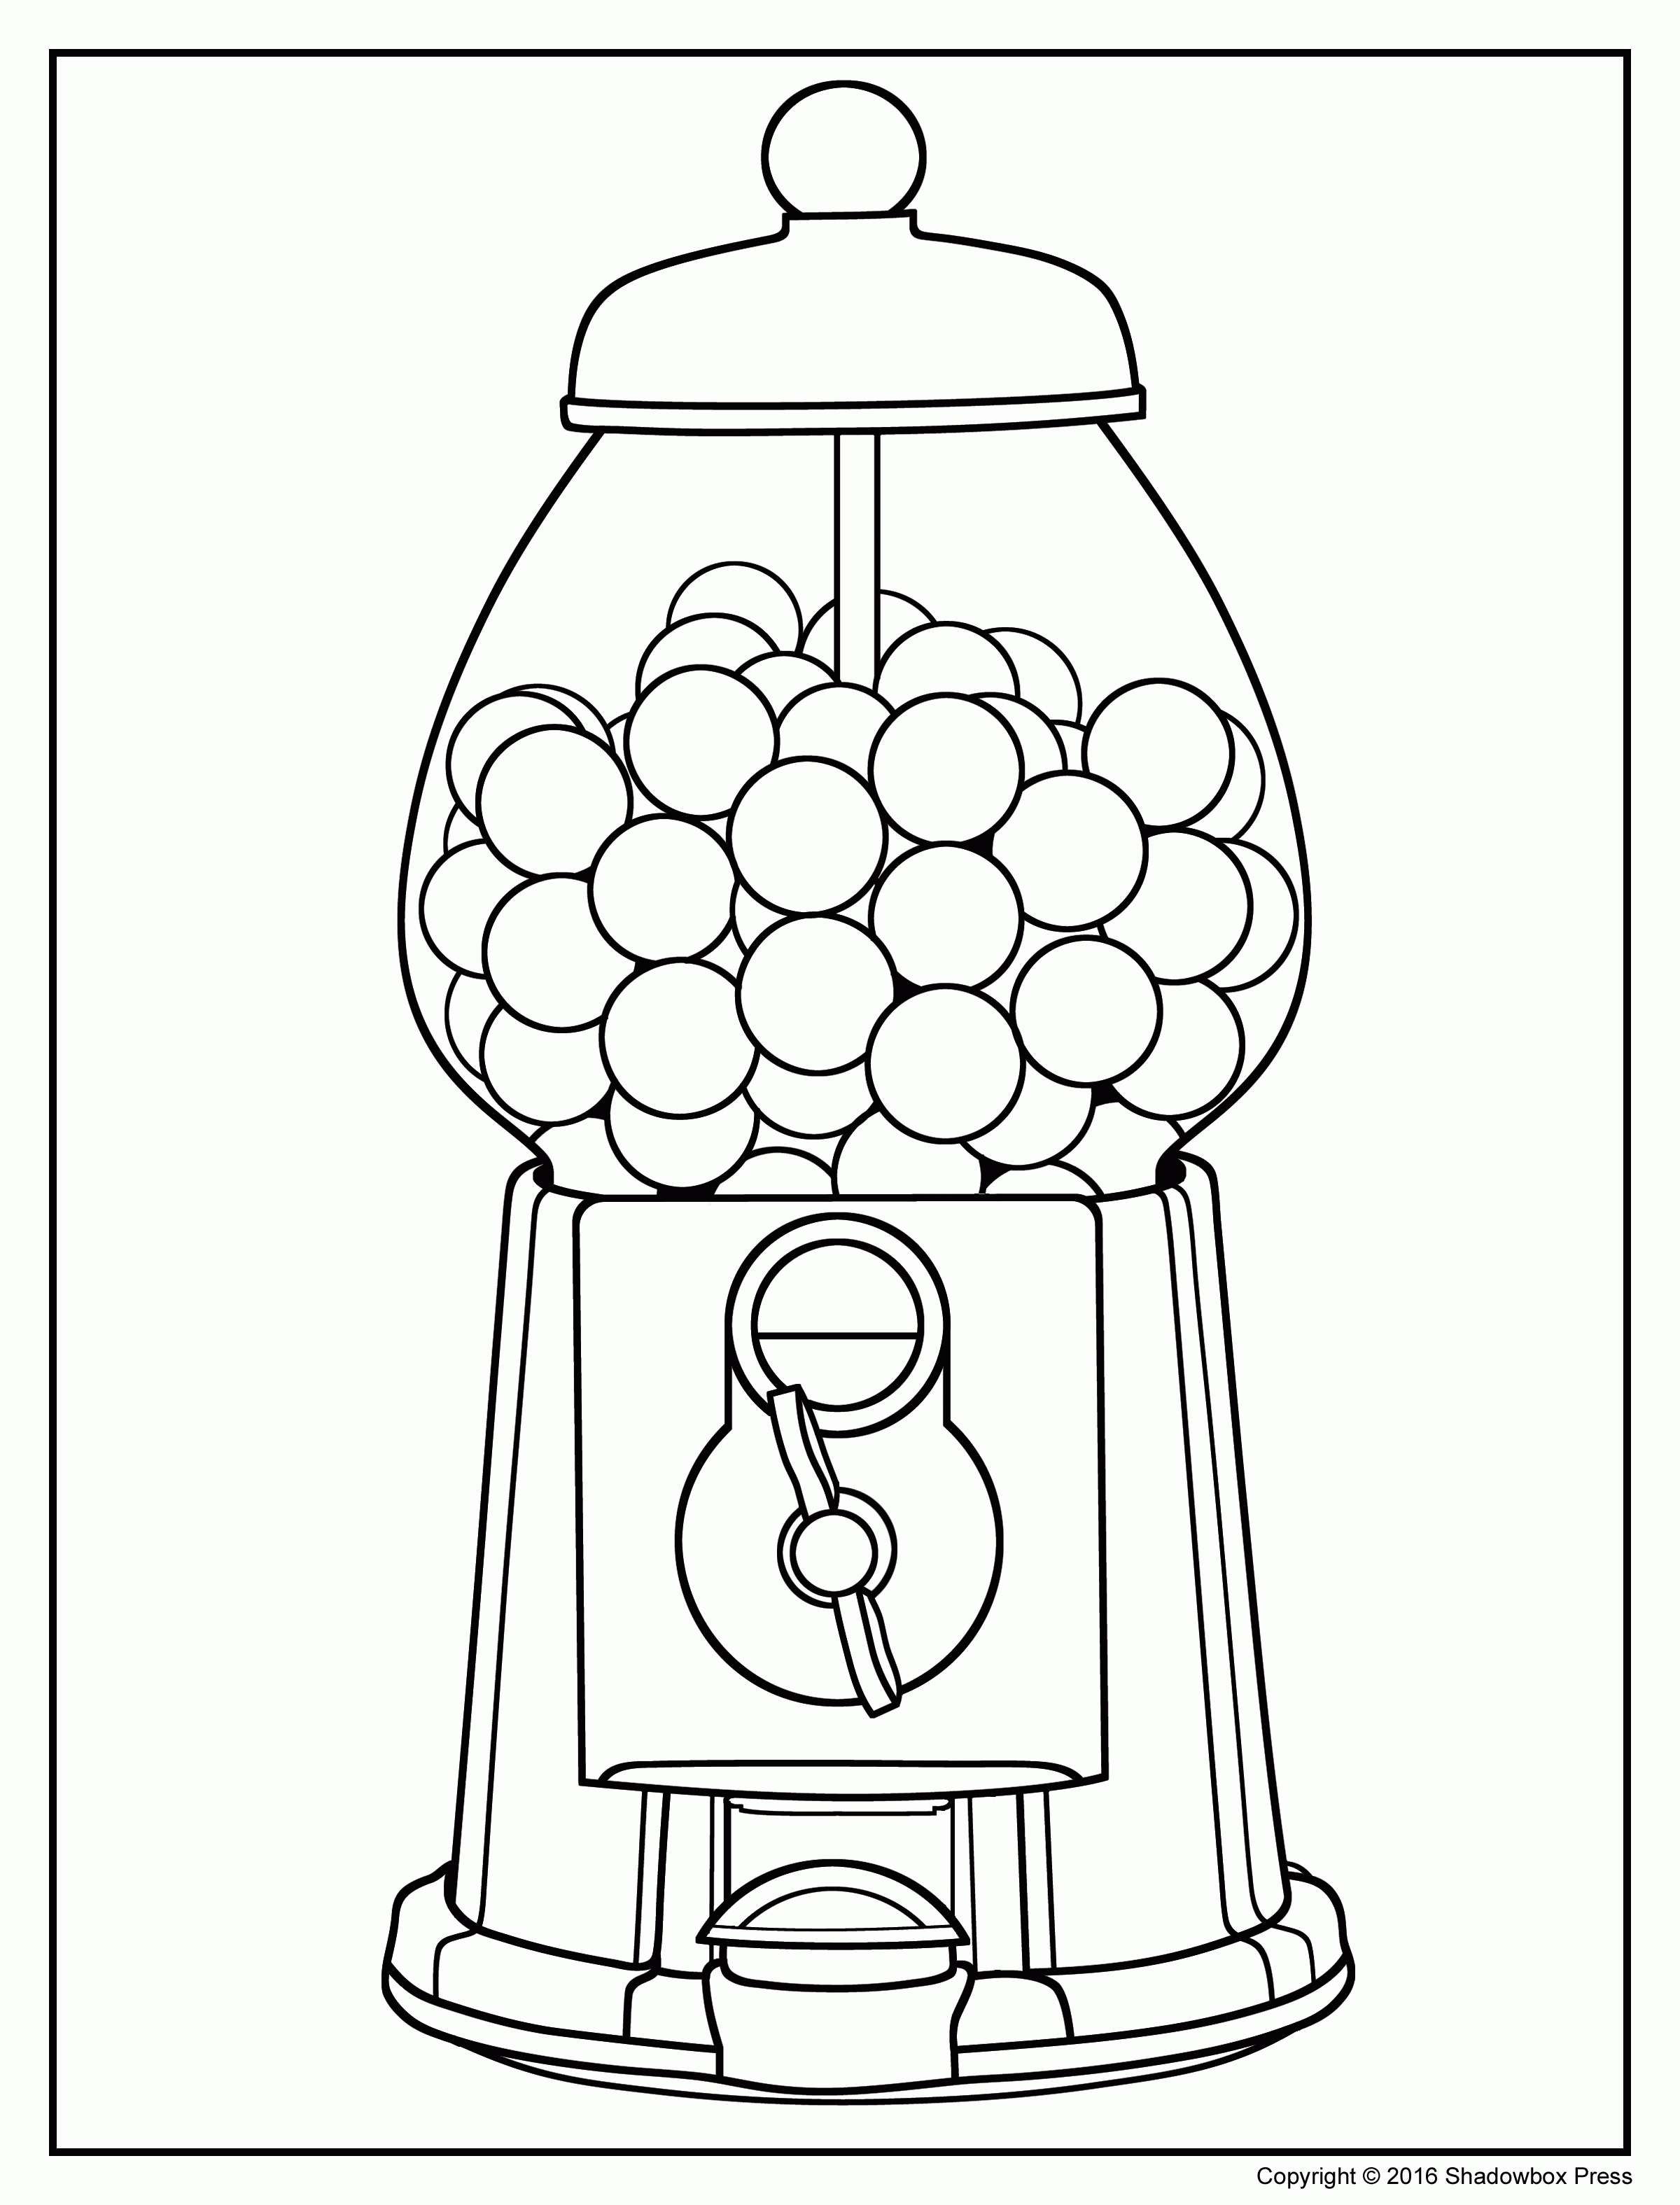 Free Downloadable Coloring Pages for Adults with Dementia ...